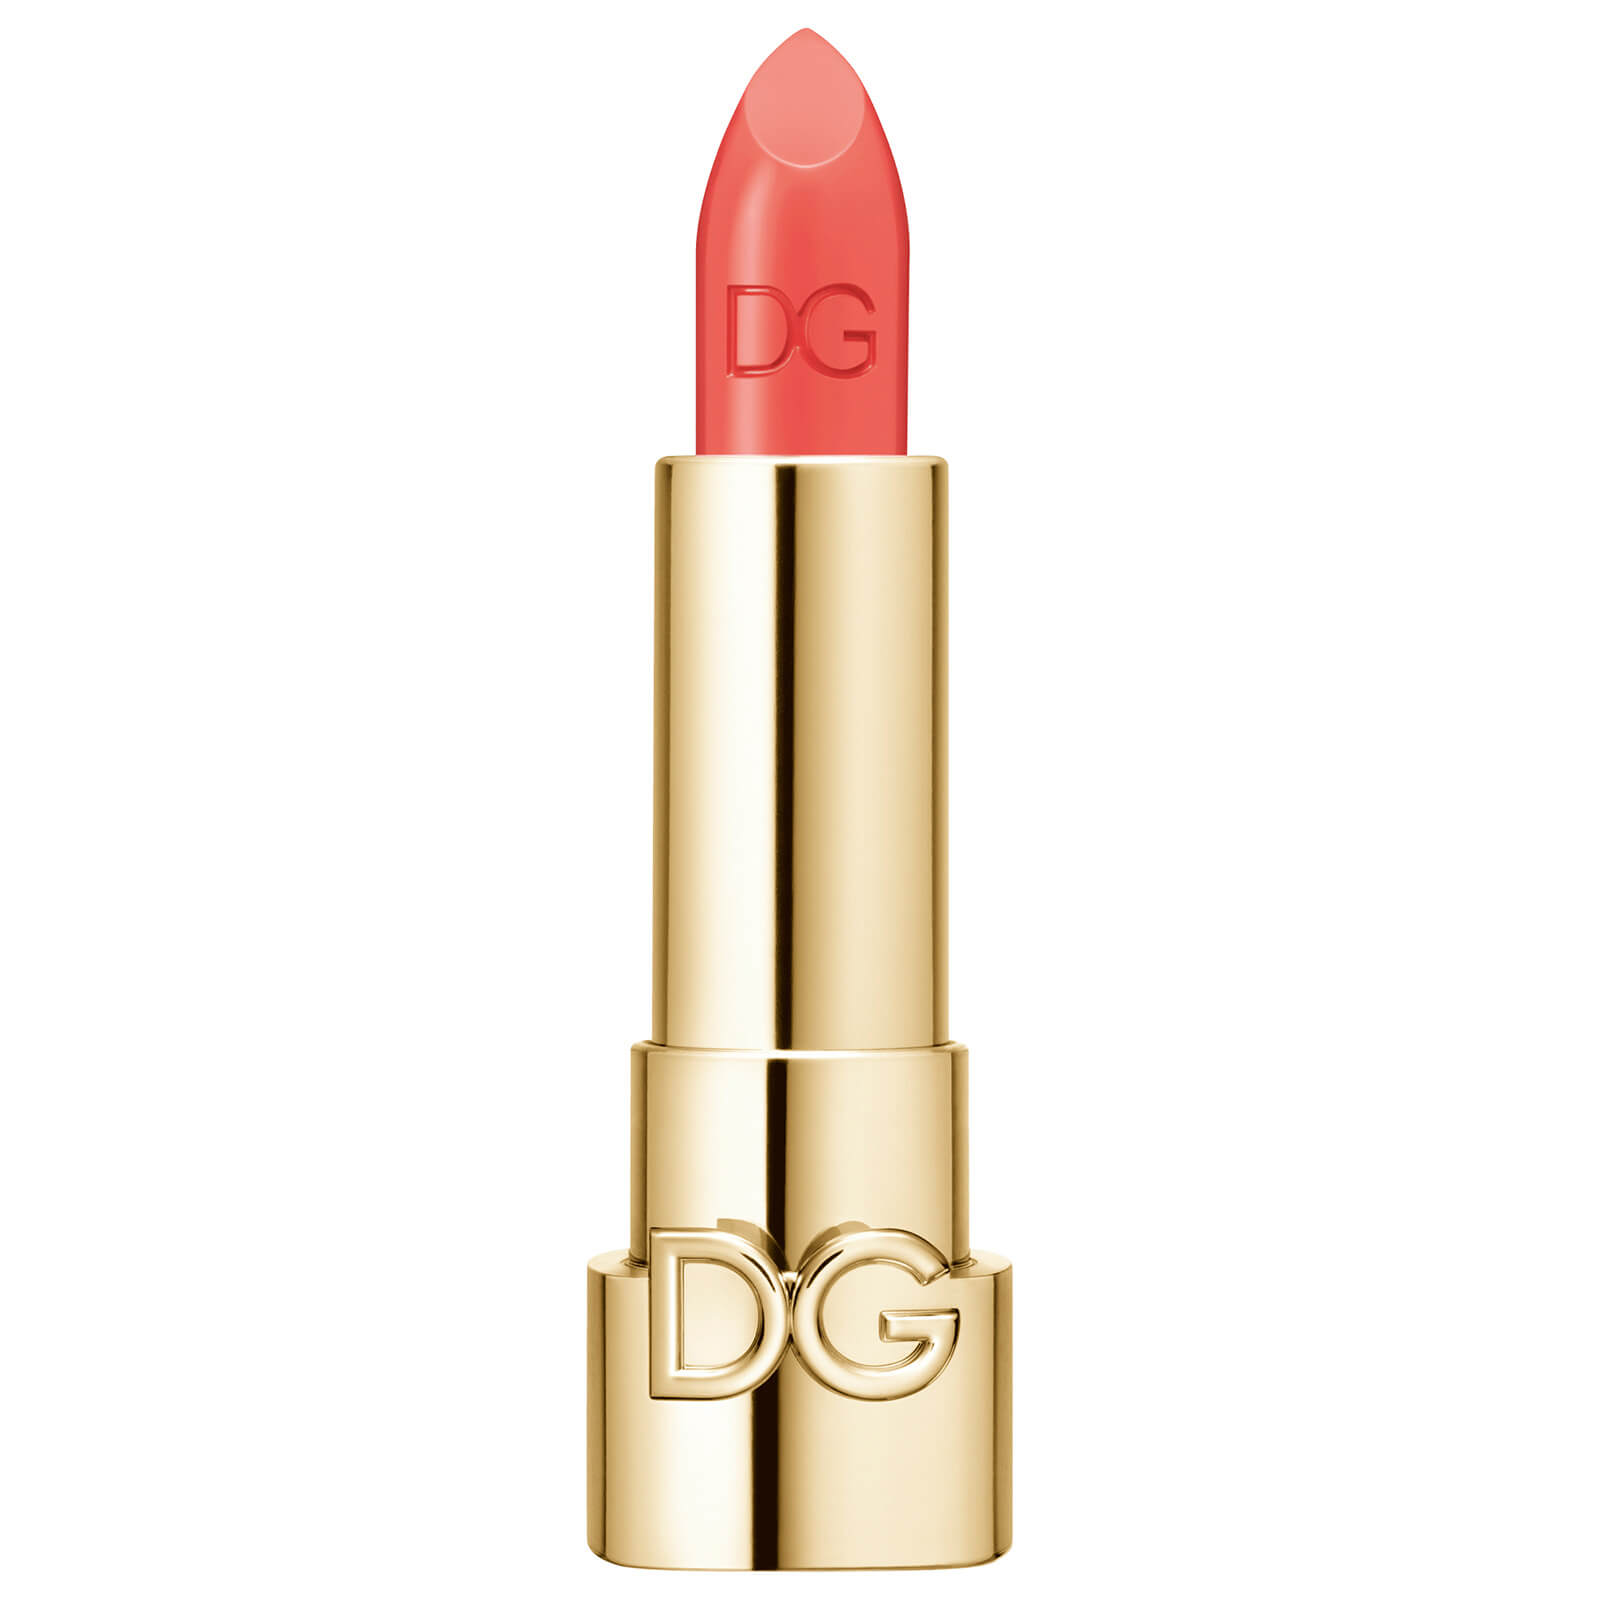 Image of Dolce&Gabbana The Only One Lipstick 1.7g (No Cap) (Various Shades) - 500 Joyful Peach